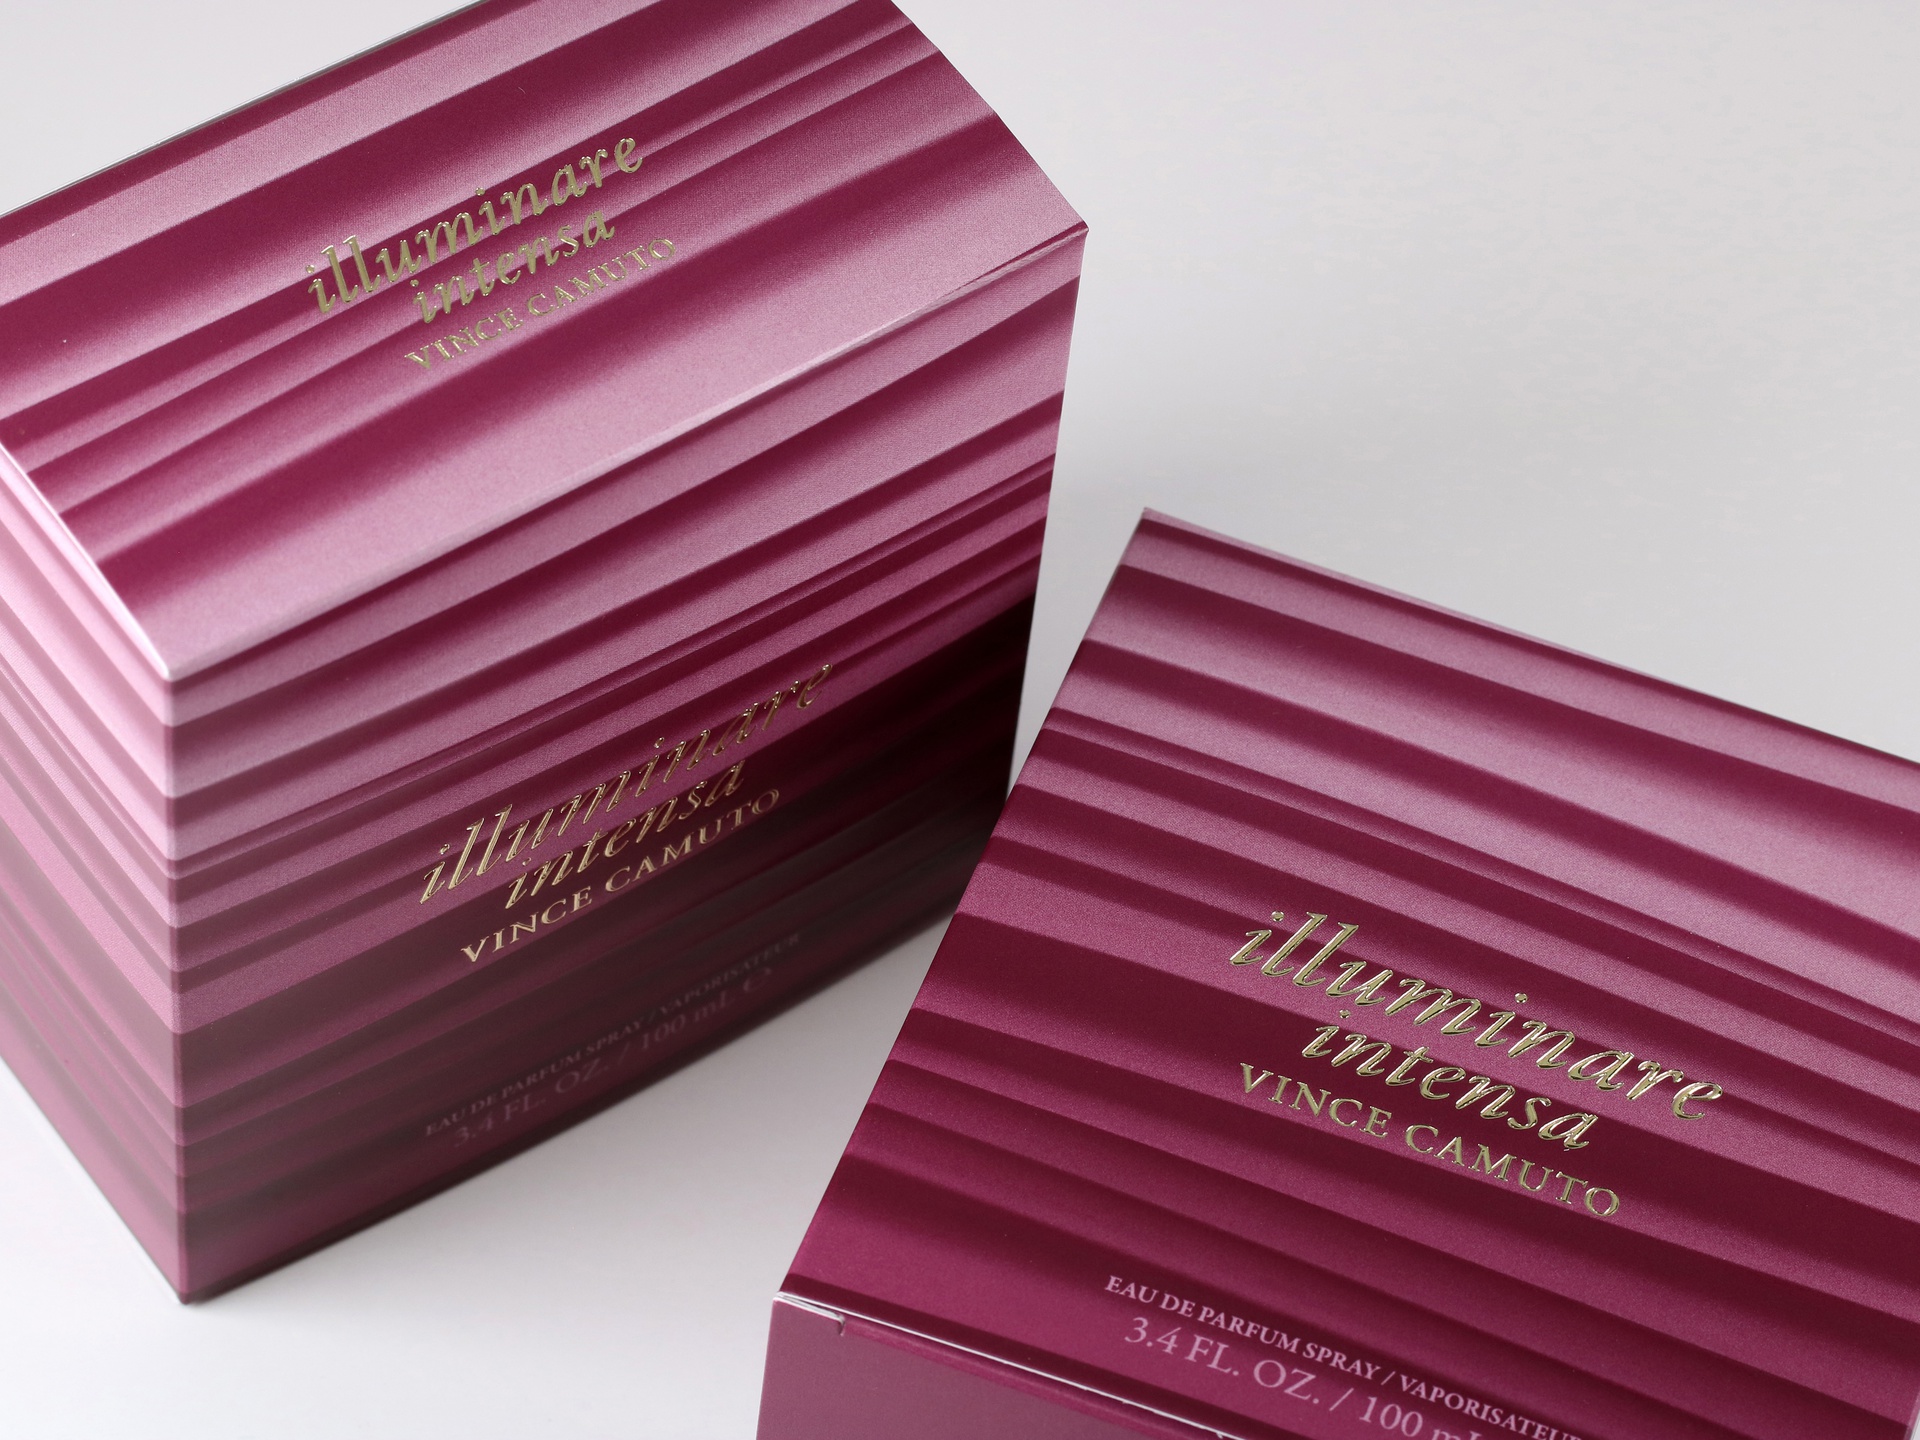 Illuminare Intensa Vince Camuto folding cartons features gold hot foil stamping and multi-level embossing.